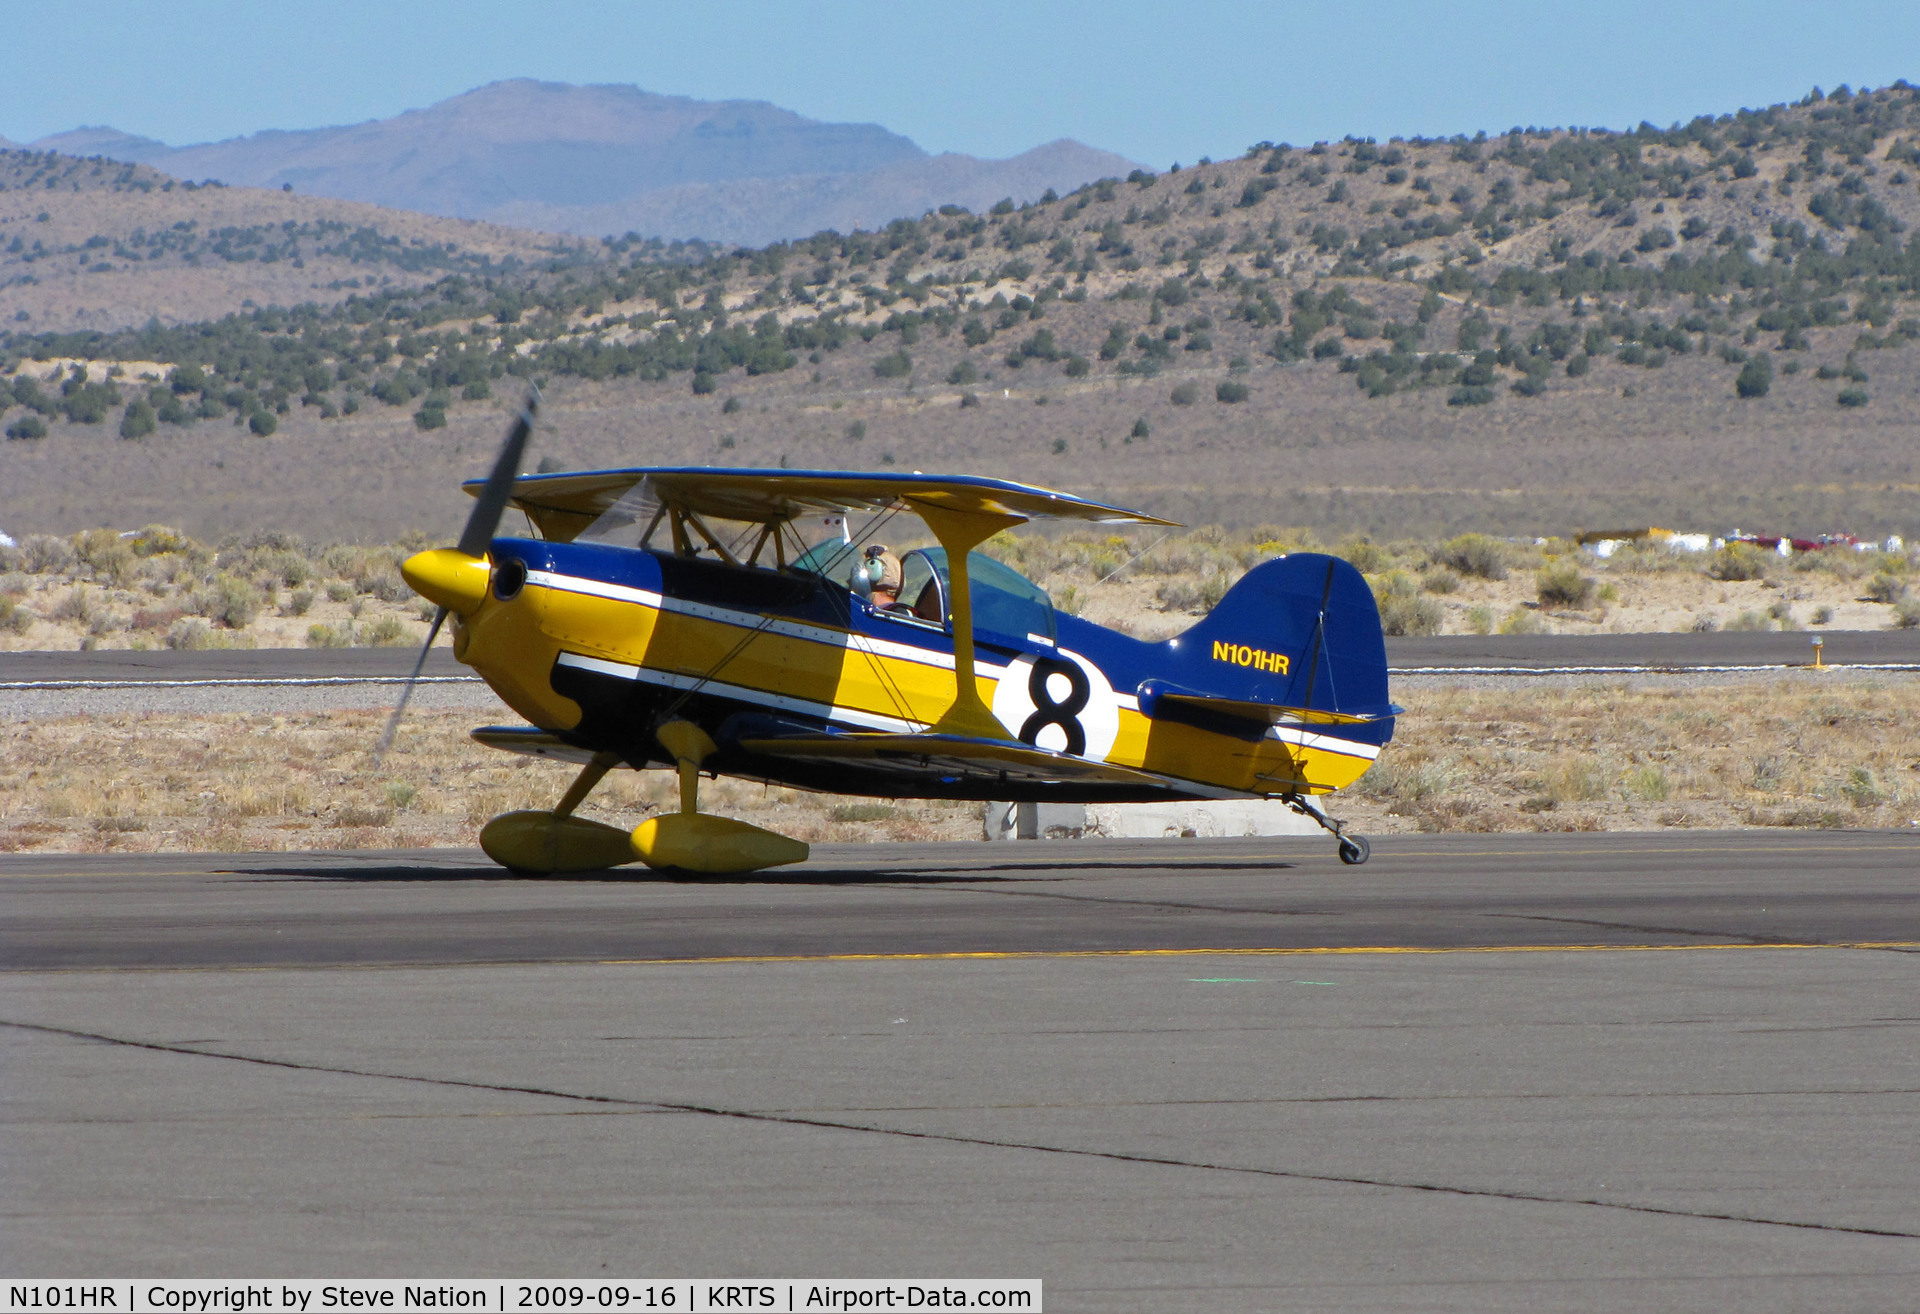 N101HR, 1993 Pitts S-1S Special C/N COBB 001, Race #8  1993 Cobb Lawrence L PITTS S1S in Biplane Class @ 2009 Reno Air Races - taxis in from heat